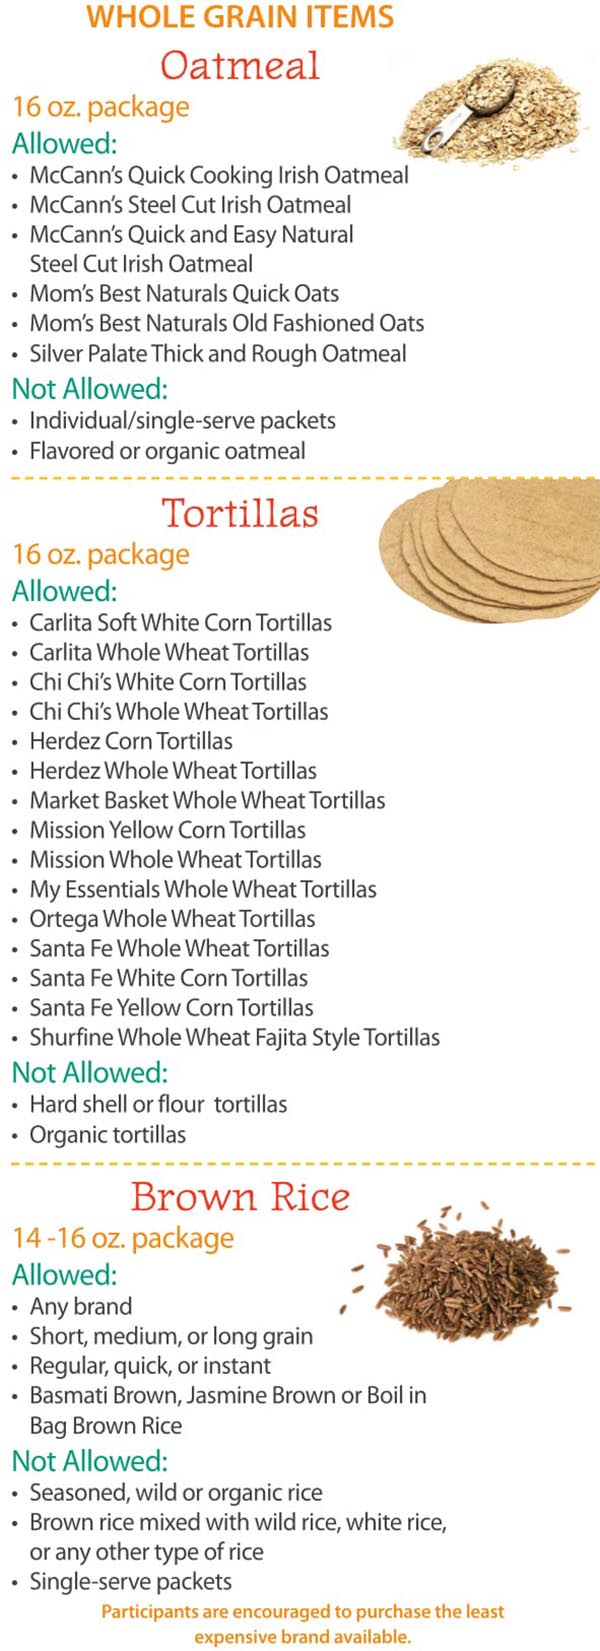 Maine WIC Food List Whole Grain, Oatmeal, Tortillas and Brown Rice